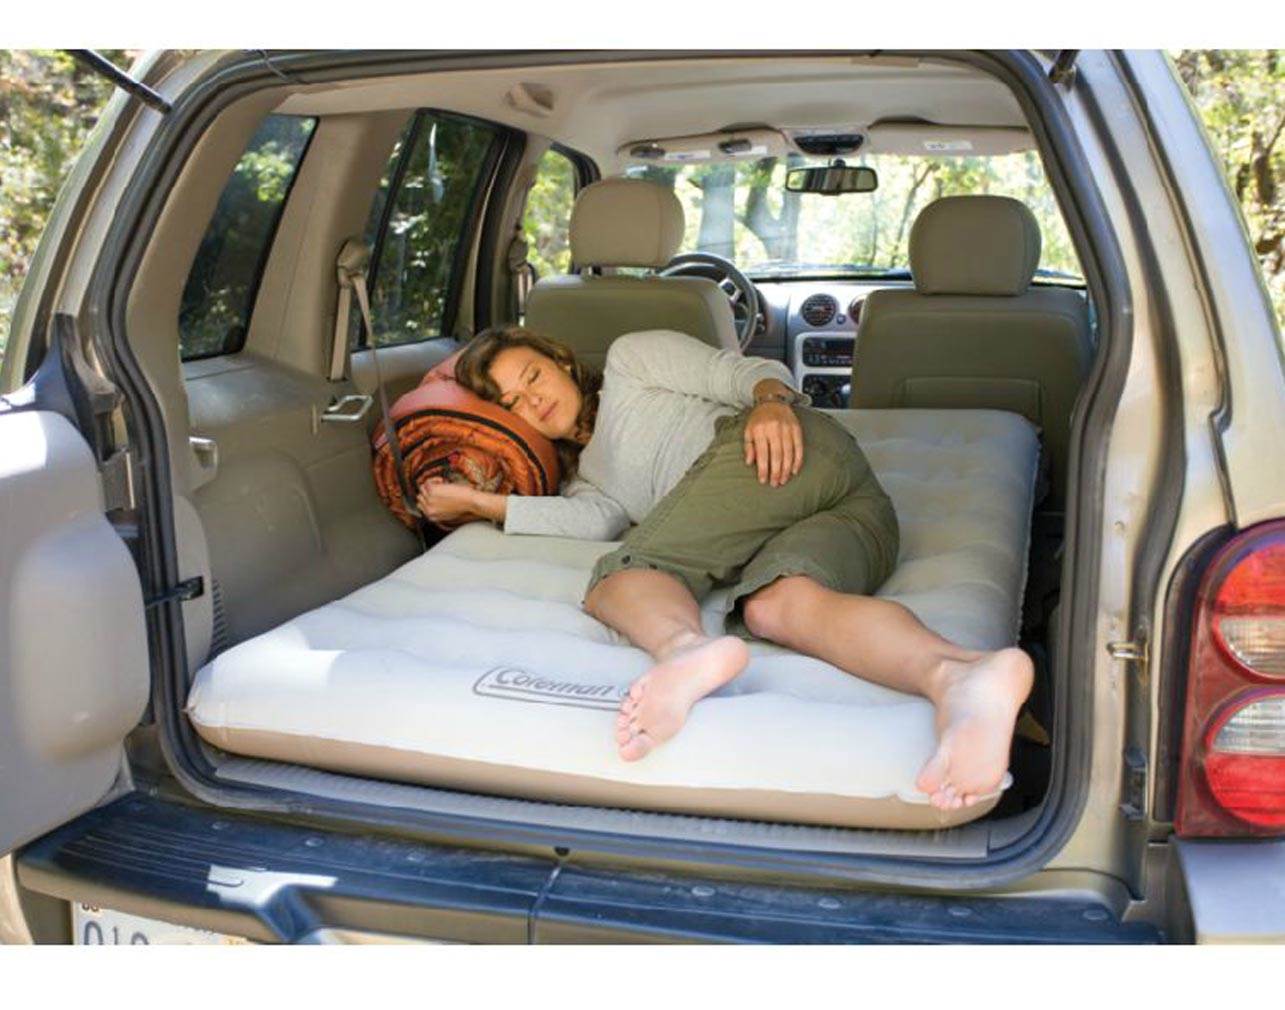 NEW! COLEMAN Packable Camping SUV Quickbed Heavy Duty PVC Air Bed Twin Mattress - image 3 of 3